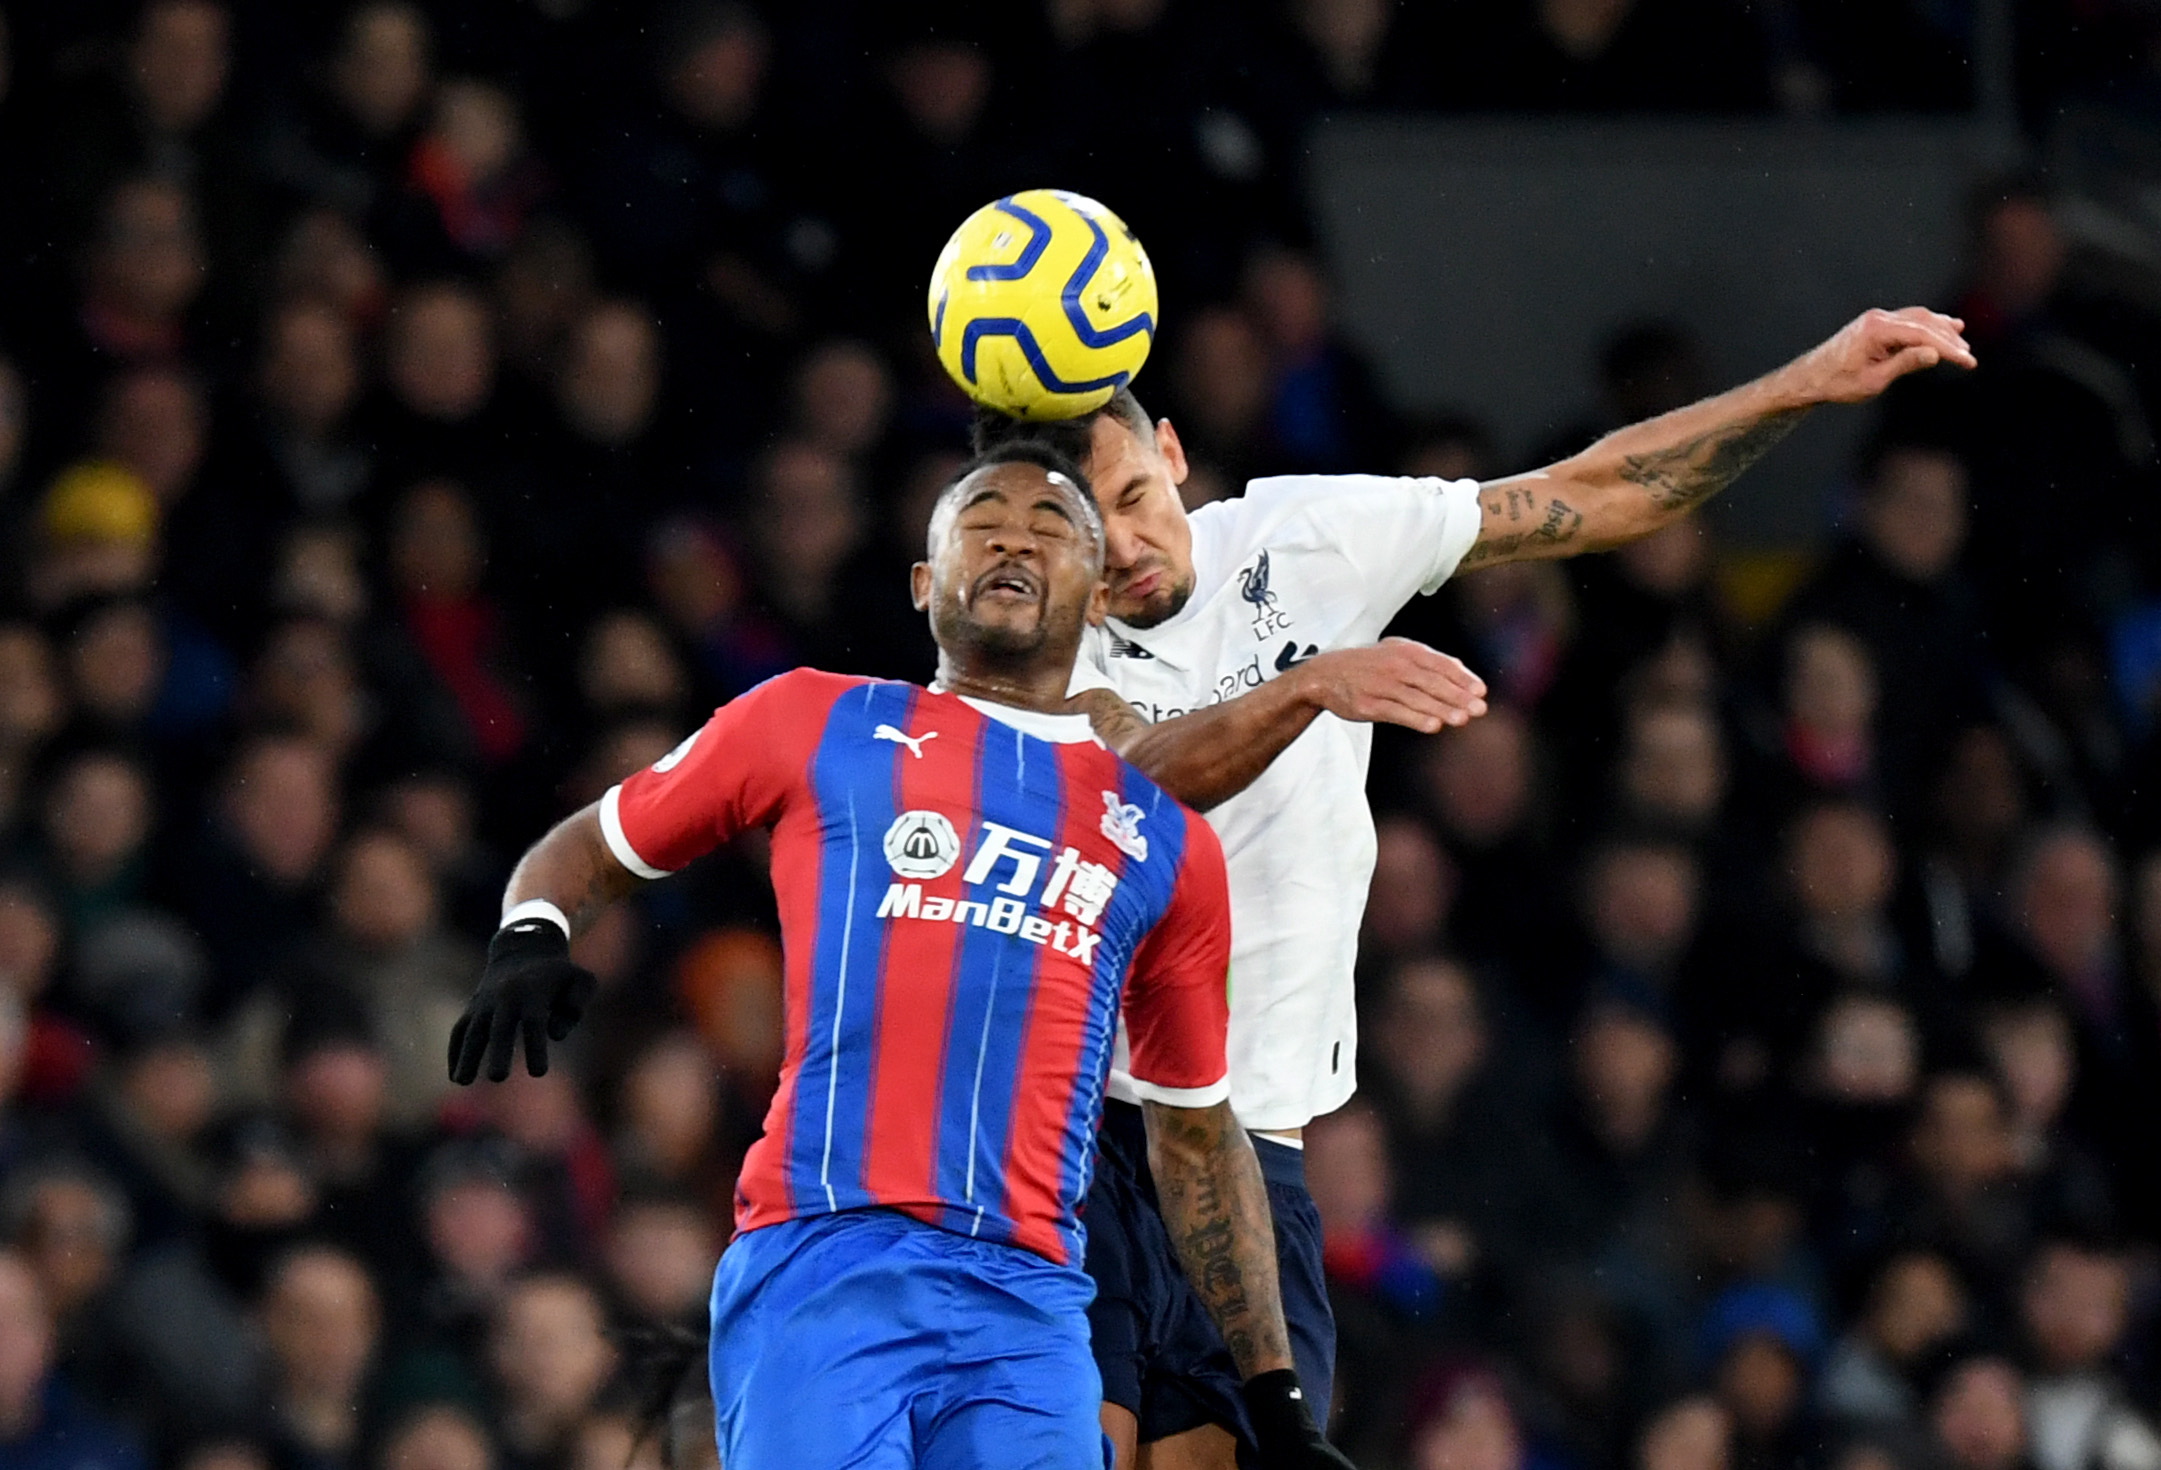 epa08019823 Liverpool's Dejan Lovren (R) in actions against Crystal Palace's Jordan Ayew (L)  the English Premier League soccer match between Crystal Palace v Liverpool at Selhurst Park in London, Britain, 23 November 2019.  EPA/FACUNDO ARRIZABALAGA EDITORIAL USE ONLY. No use with unauthorized audio, video, data, fixture lists, club/league logos or 'live' services. Online in-match use limited to 120 images, no video emulation. No use in betting, games or single club/league/player publications